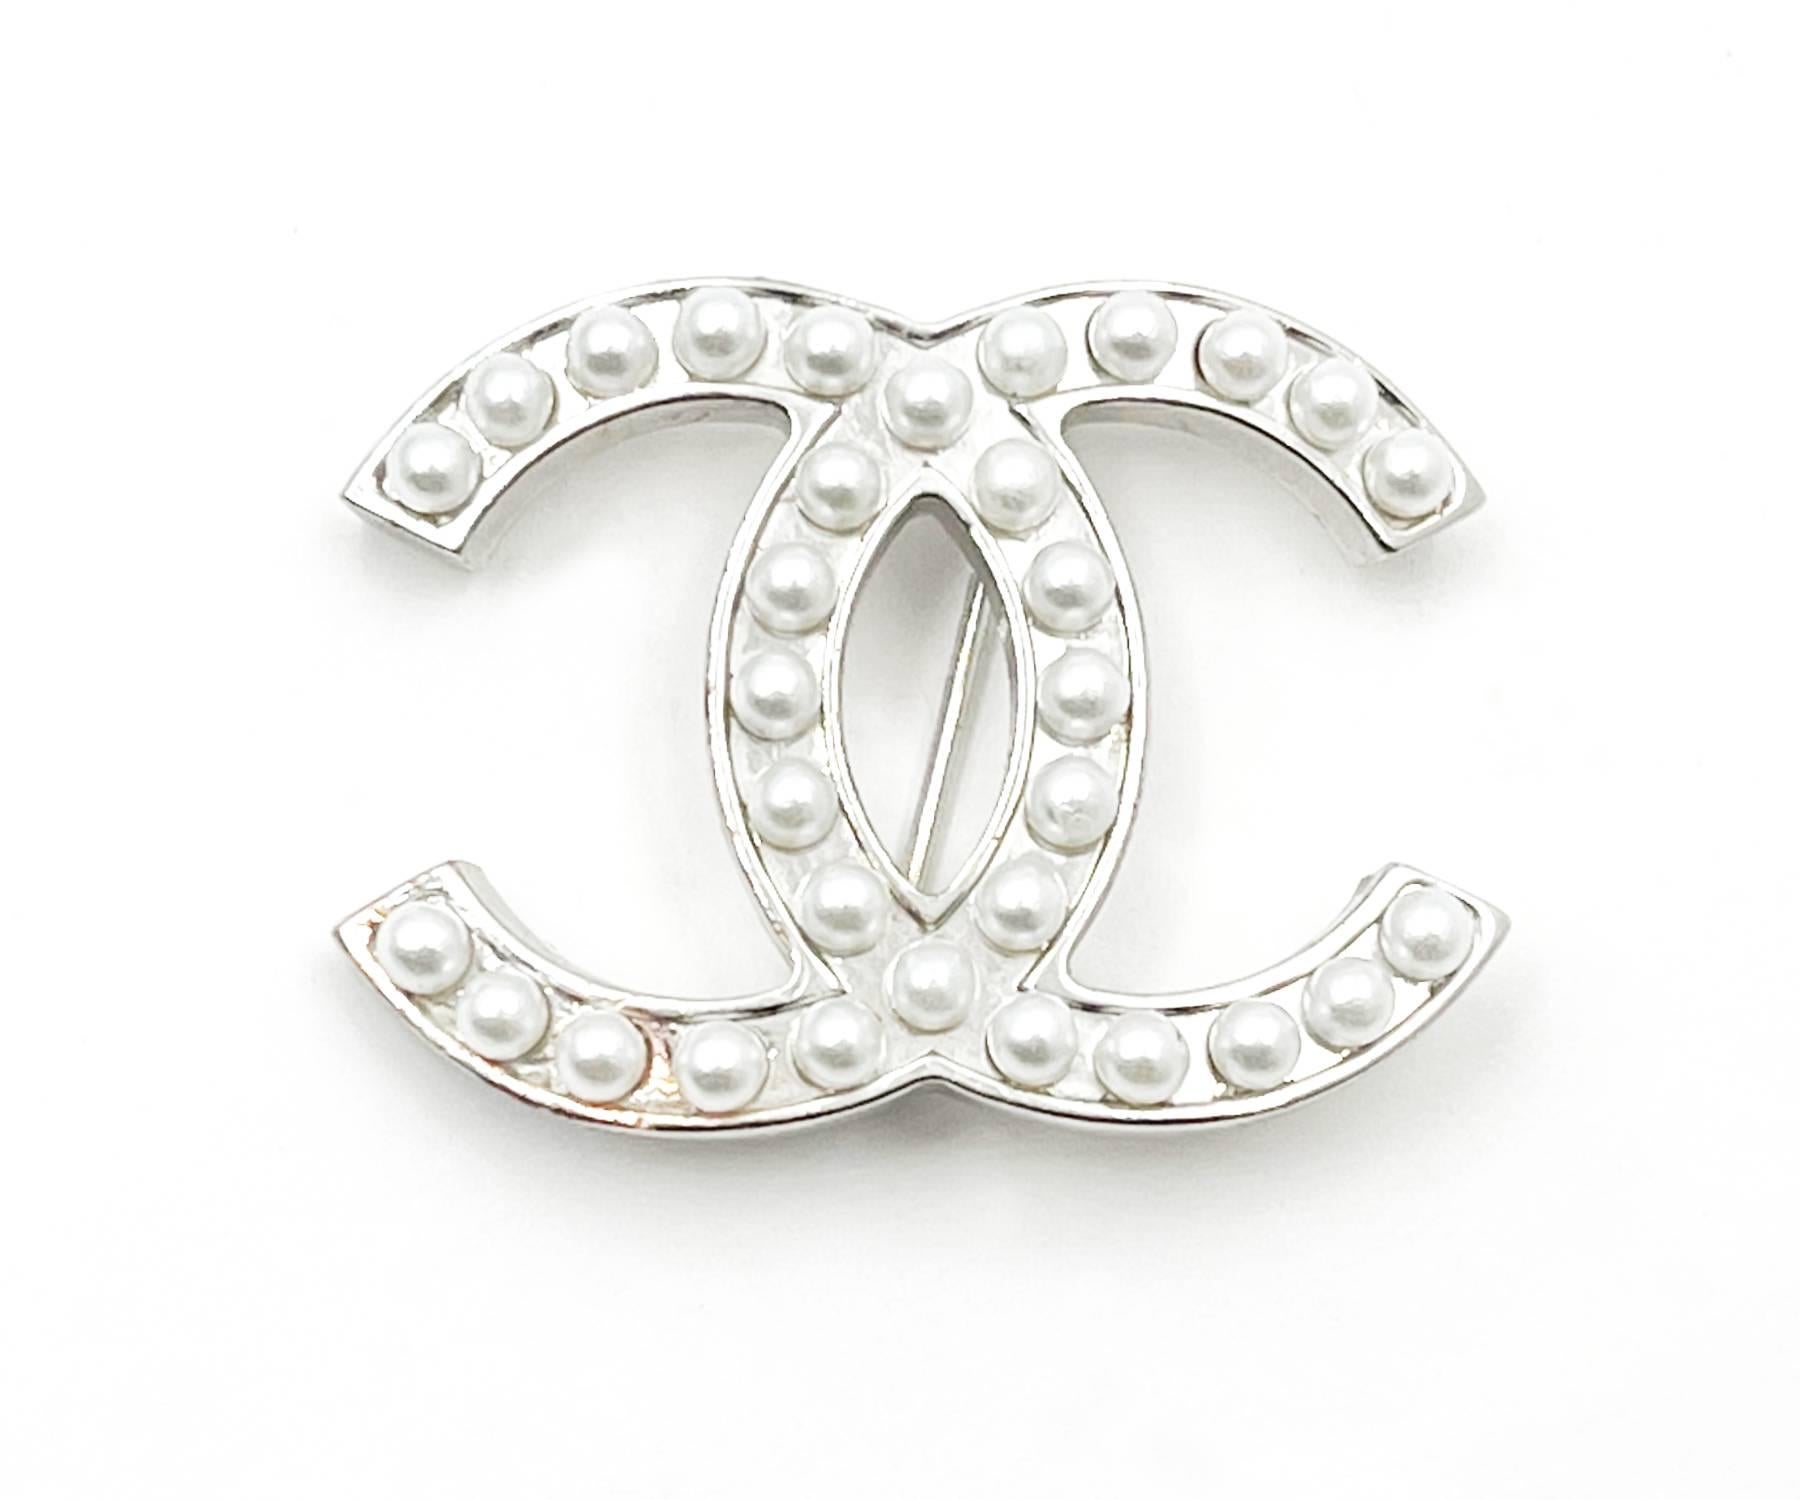 Chanel Classic Silver CC Pearl Brooch

*Marked 05
*Made in France

-Approximately 1.6″ x 1″
-Very pretty and classic
-In a good condition. There are some scuffs on the corner.

AB2005-00336

